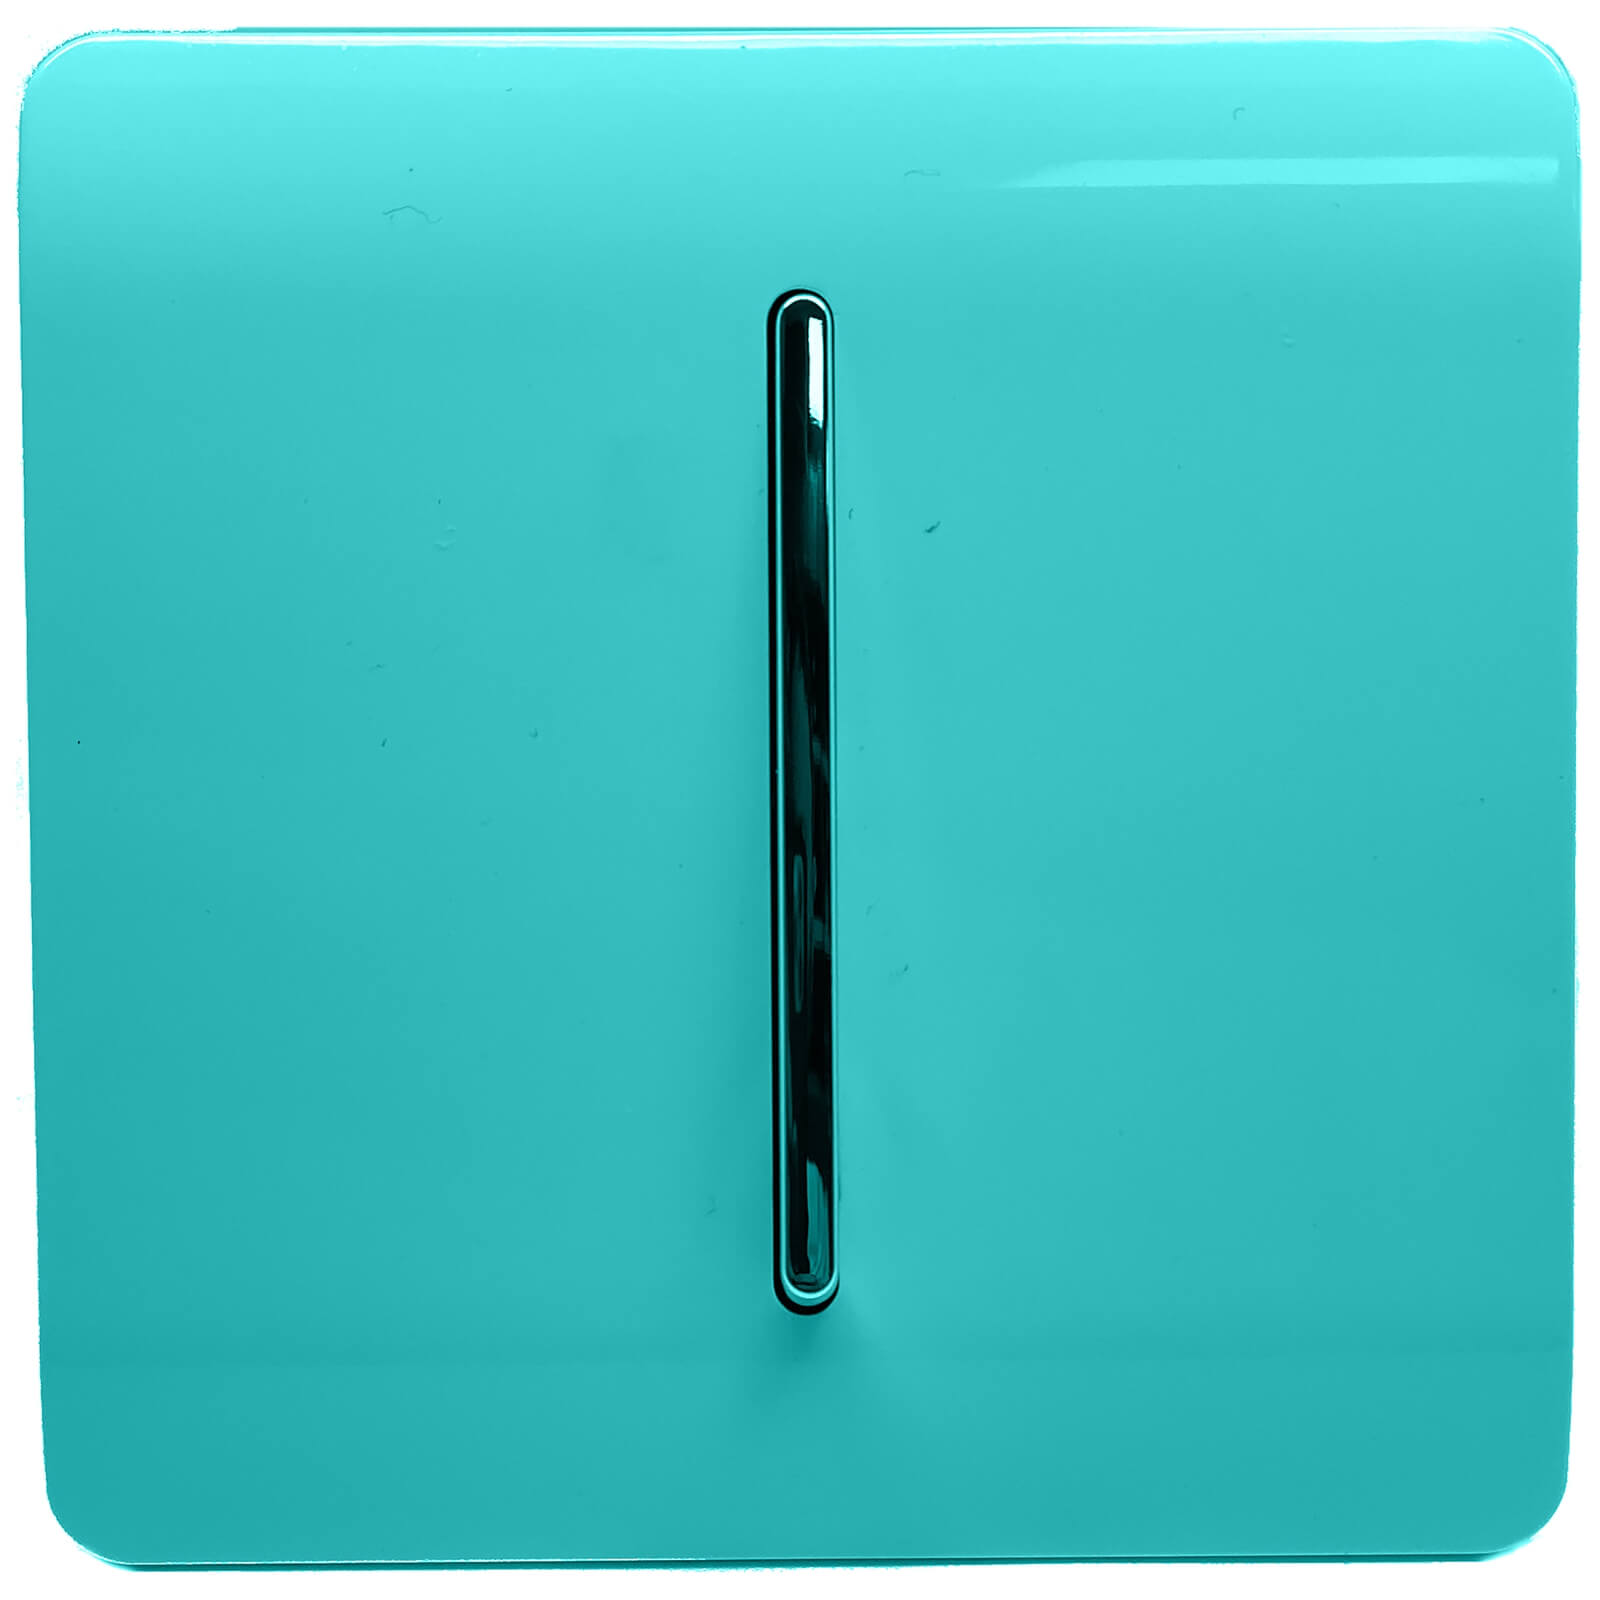 Trendi Switch 1 Gang 2 Way 10Amp Light Switch in Bright Teal